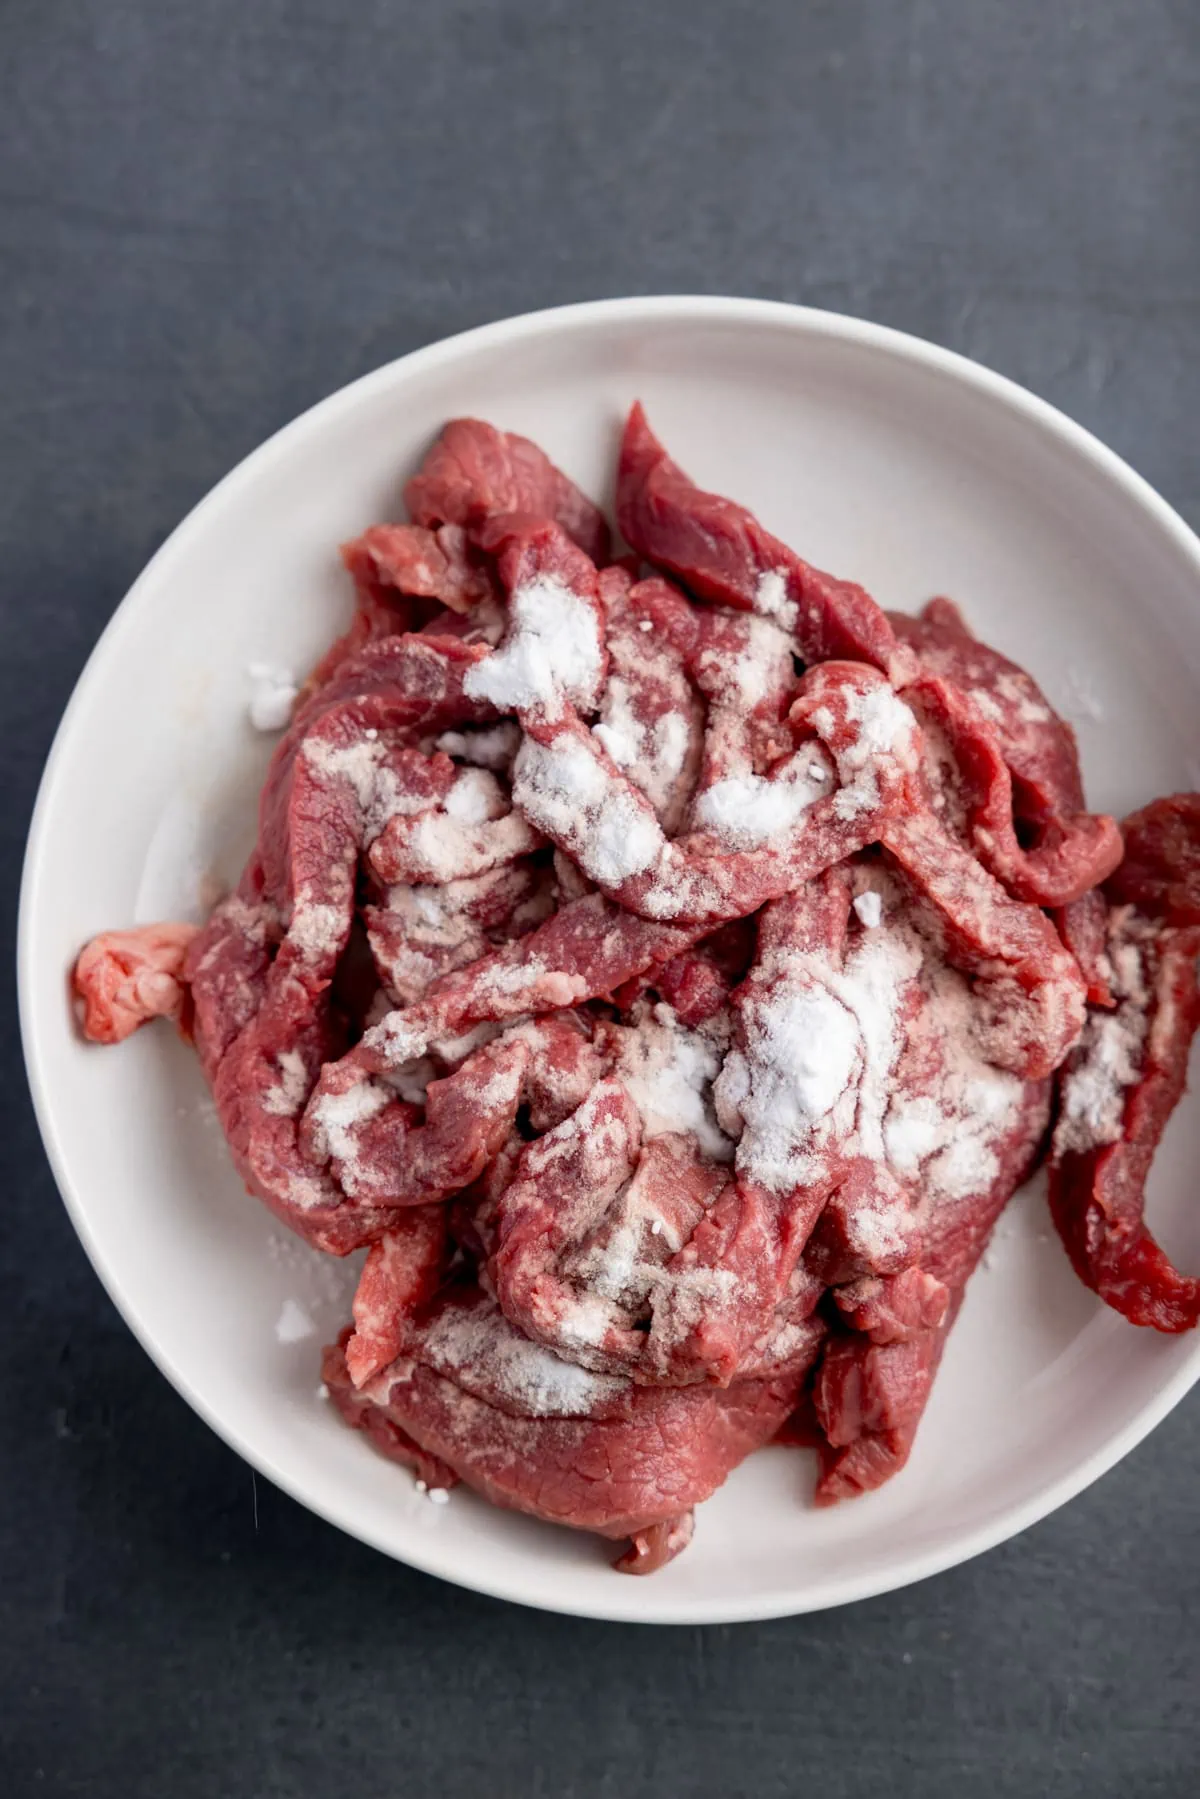 Overhead image of a white bowl on a grey surface, filled with strips of raw beef steak, coated in bicarbonate of soda.